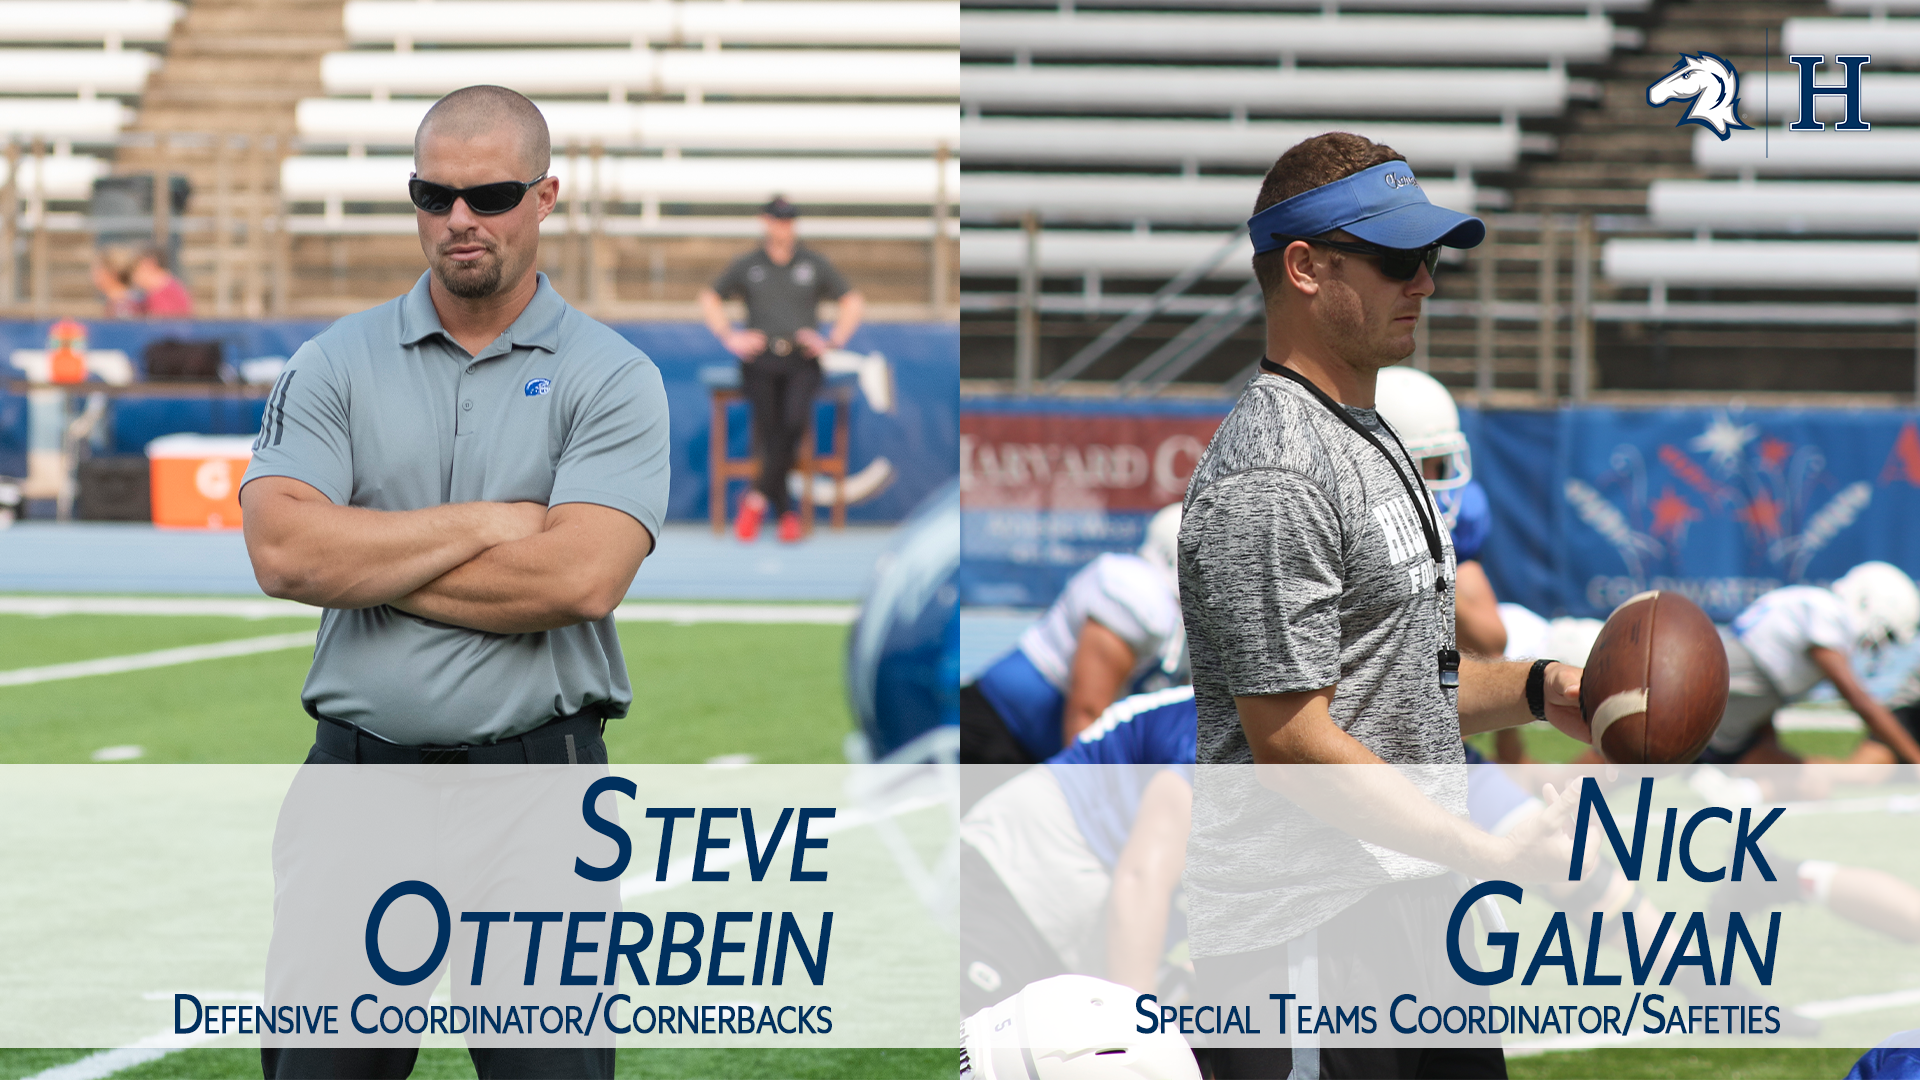 Charger coaches Steve Otterbein, Nick Galvan promoted to coordinator roles